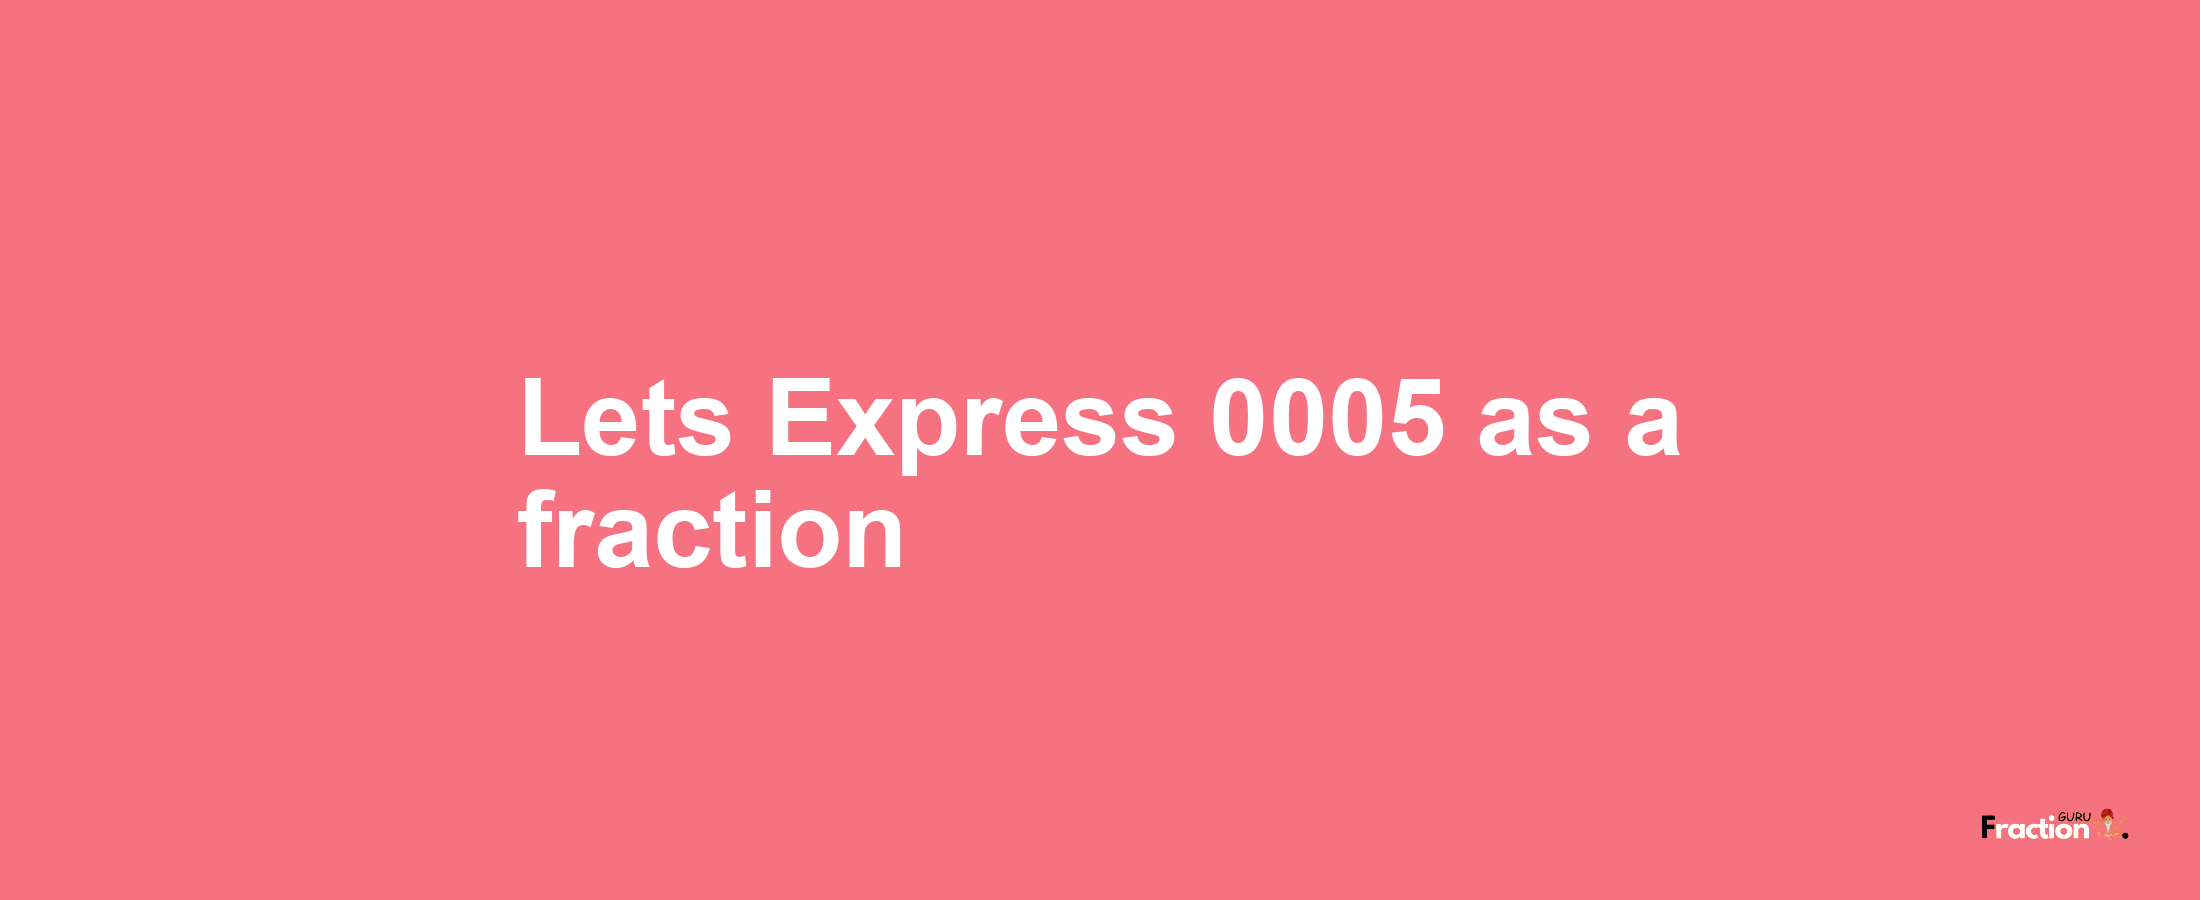 Lets Express 0005 as afraction